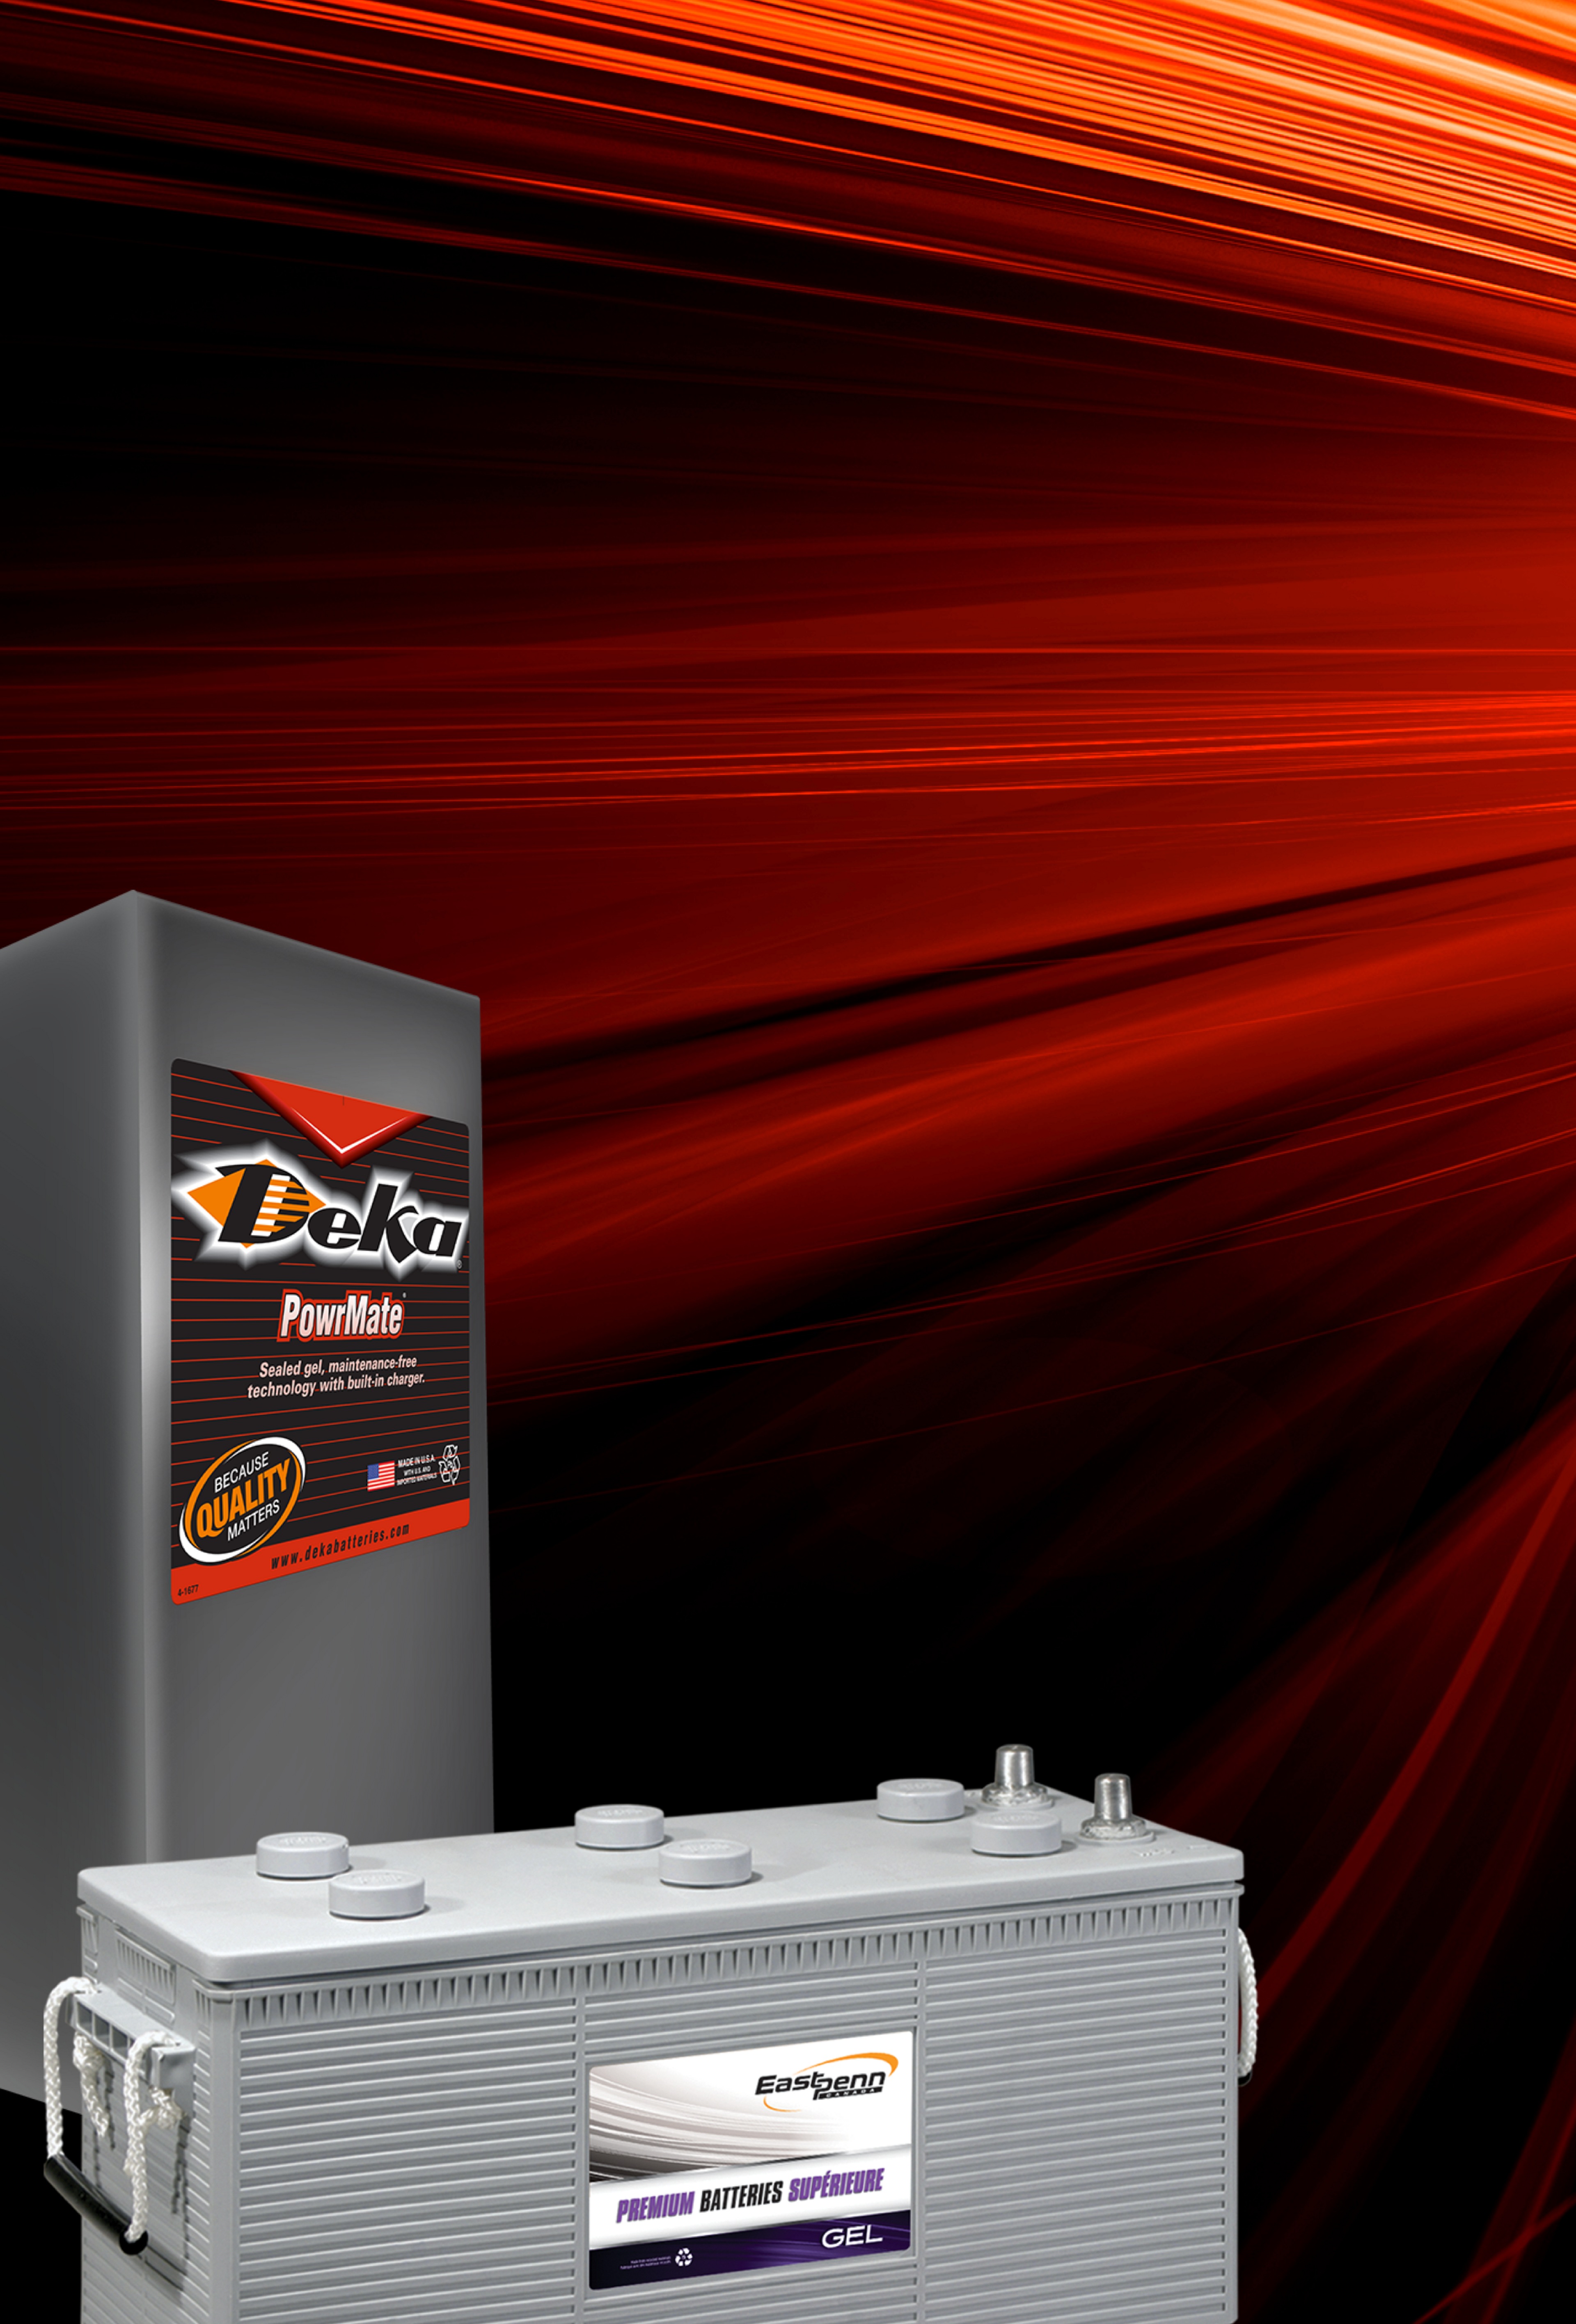 Picture of deka PowrMate battery and East Penn brand car battery on a black background with red light flares